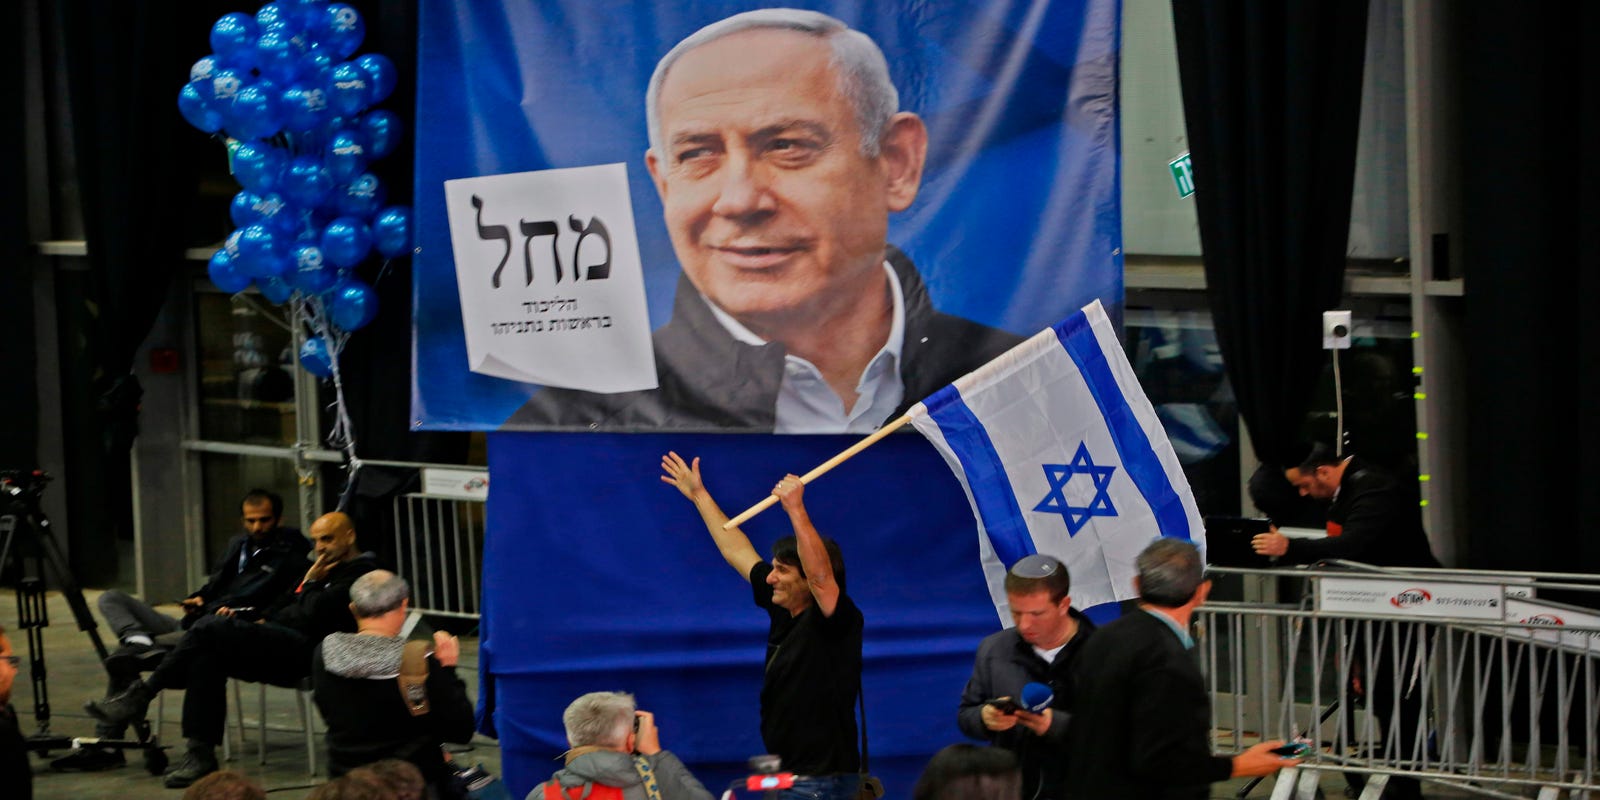 Narrow win predicted for Netanyahu in general elections